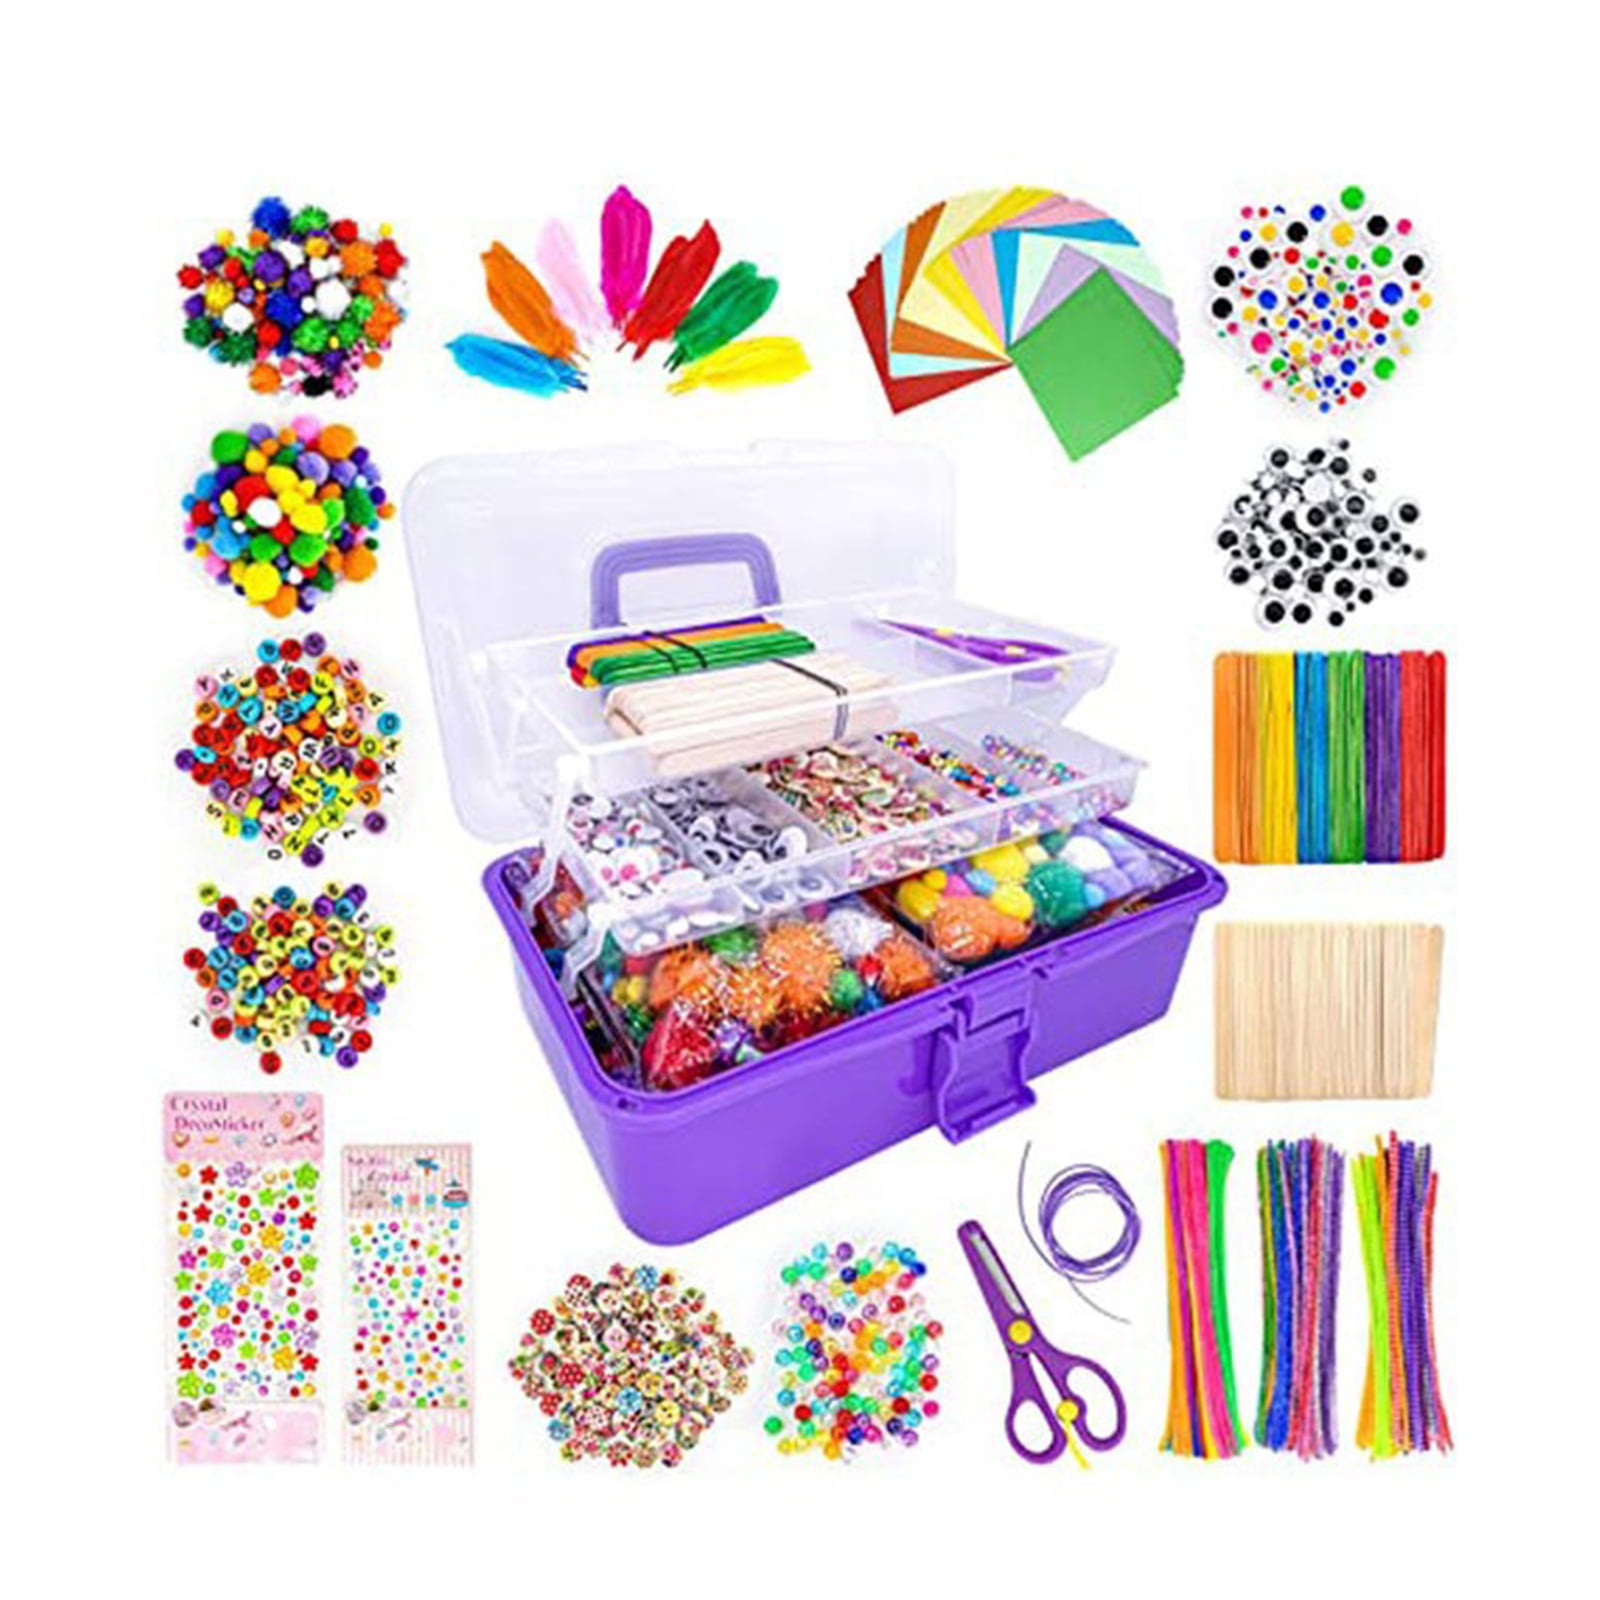 Hotbest Arts and Crafts Supplies Set for Kids DIY Craft Box for Kids Craft Set Creative Craft Supplies Box Gift for Toddlers Homeschool, Preschool